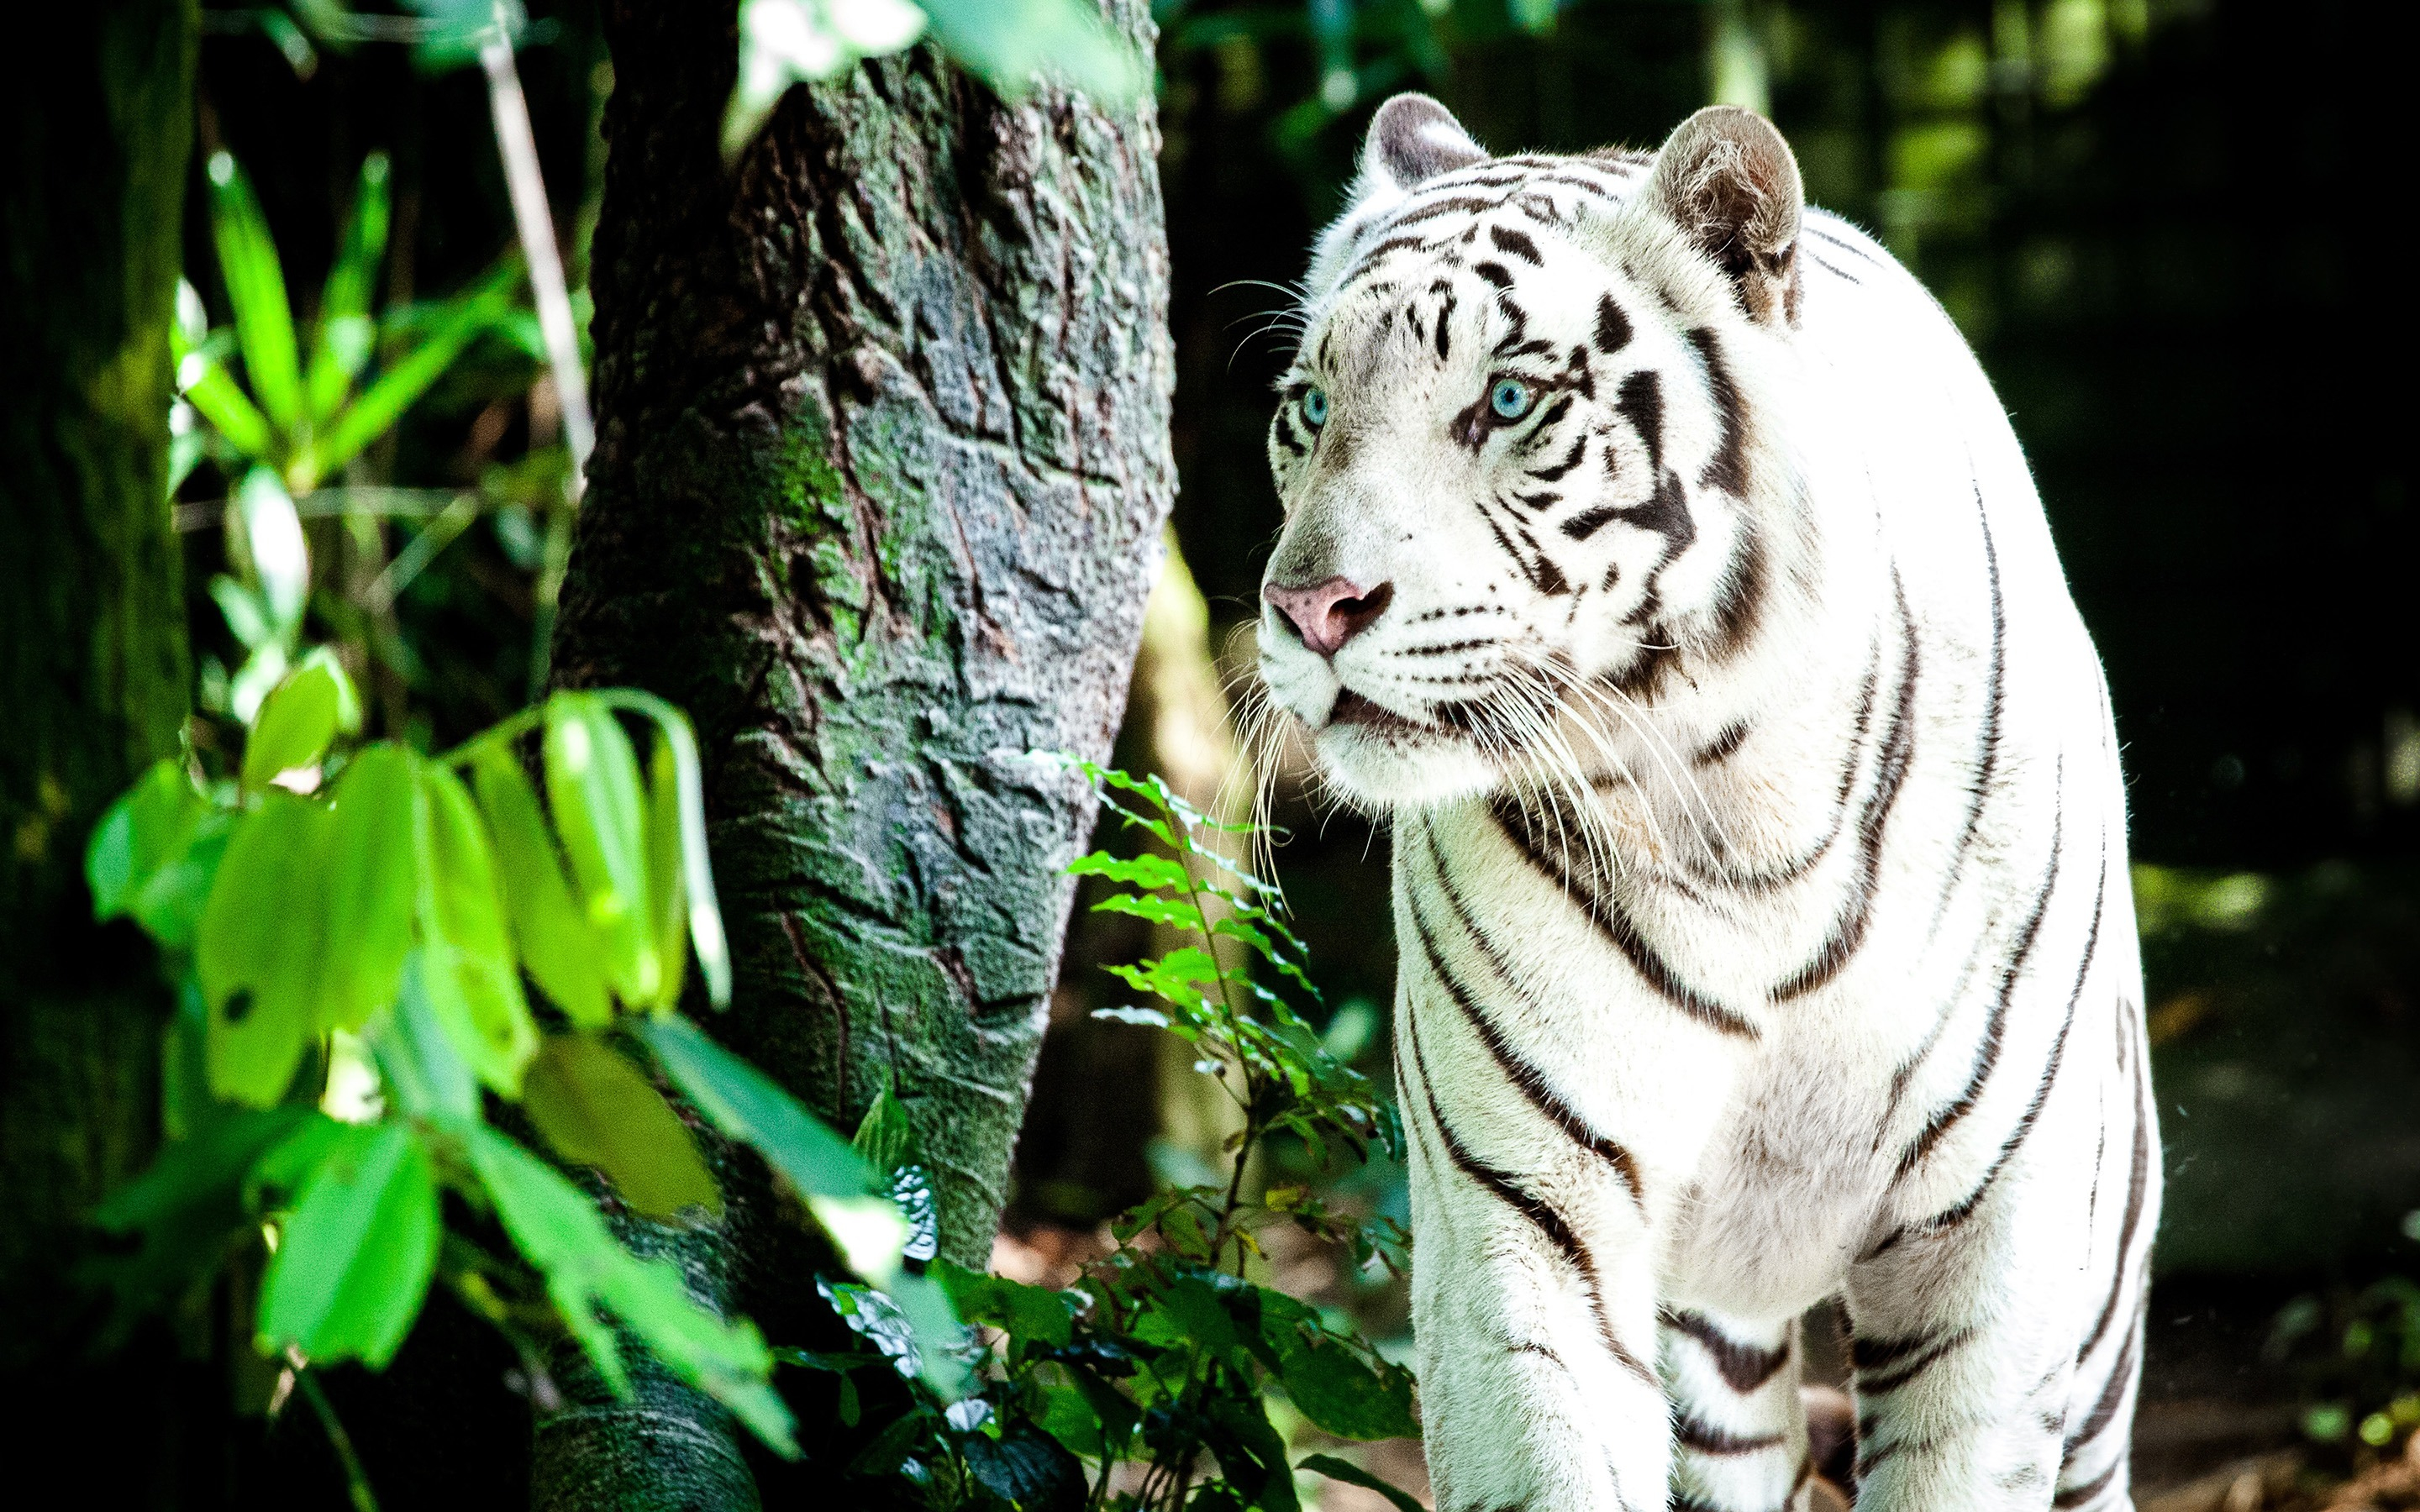 A white tiger standing by a tree